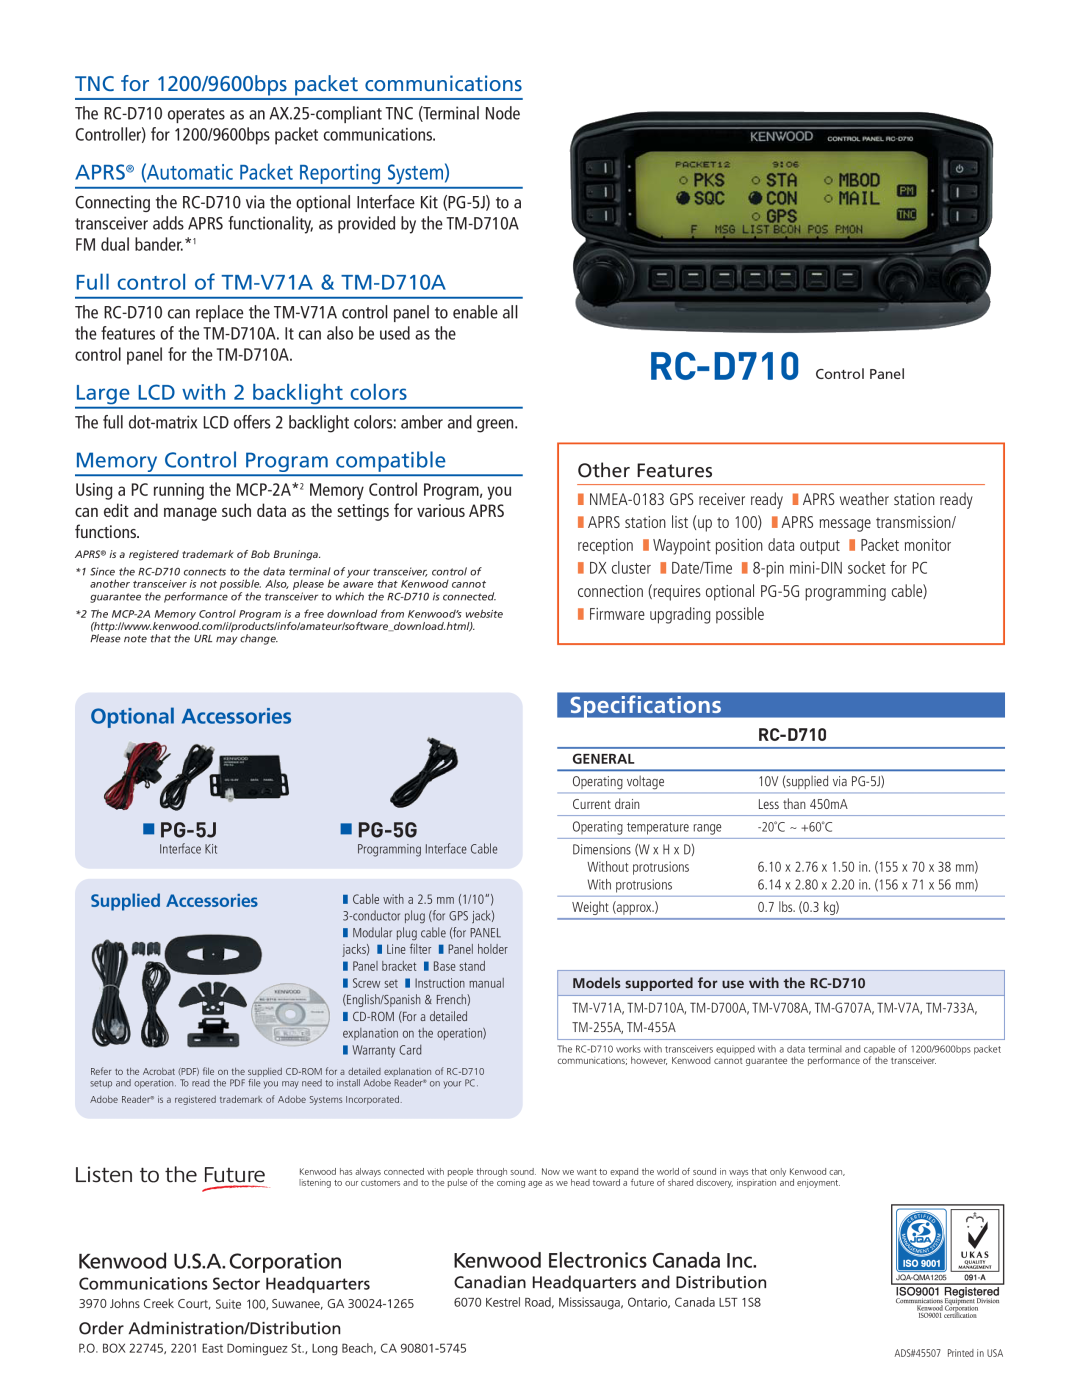 Kenwood RC-D710 Specifications, TNC for 1200/9600bps packet communications, APRS Automatic Packet Reporting System, PG-5J 